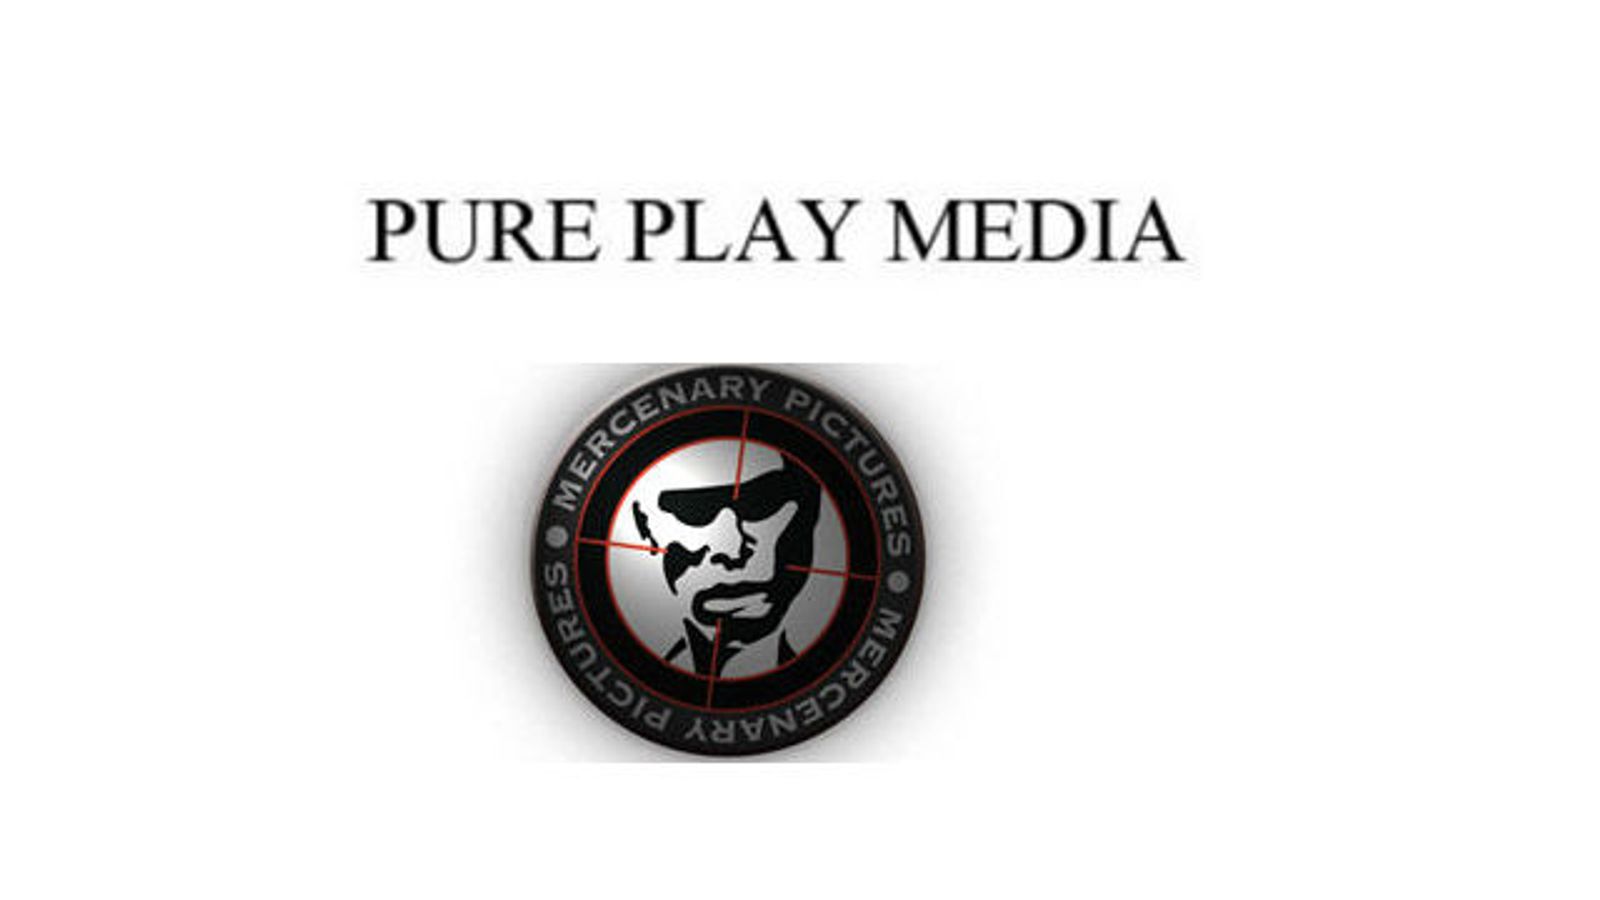 Pure Play Media Adds Mercenary Pictures to Top Studio Lineup